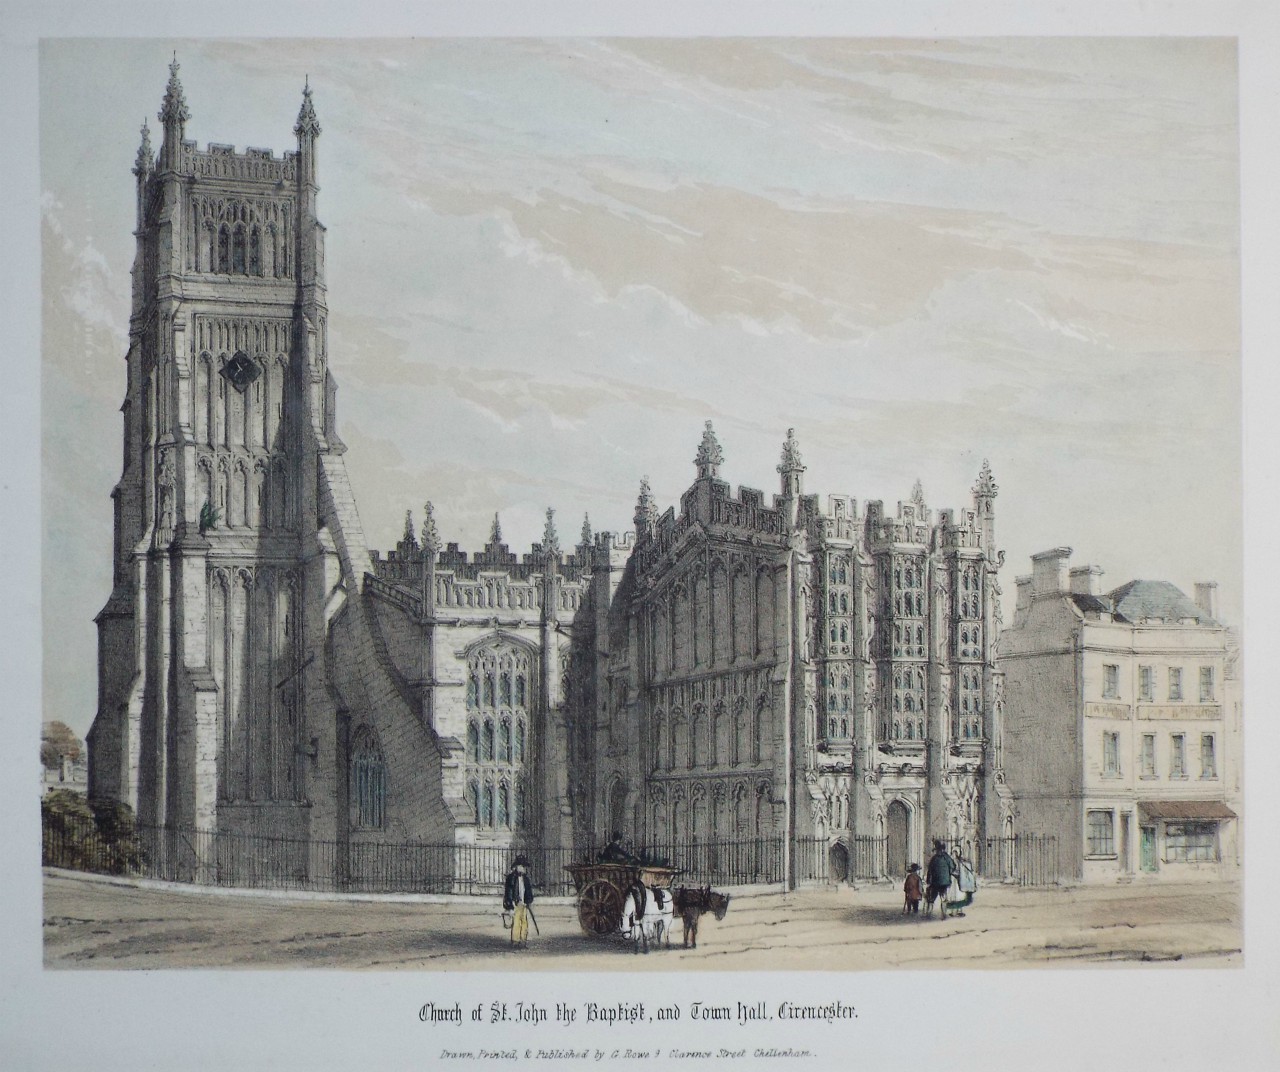 Lithograph - Church of St. John the Baptist, and Town Hall, Cirencester. - Rowe